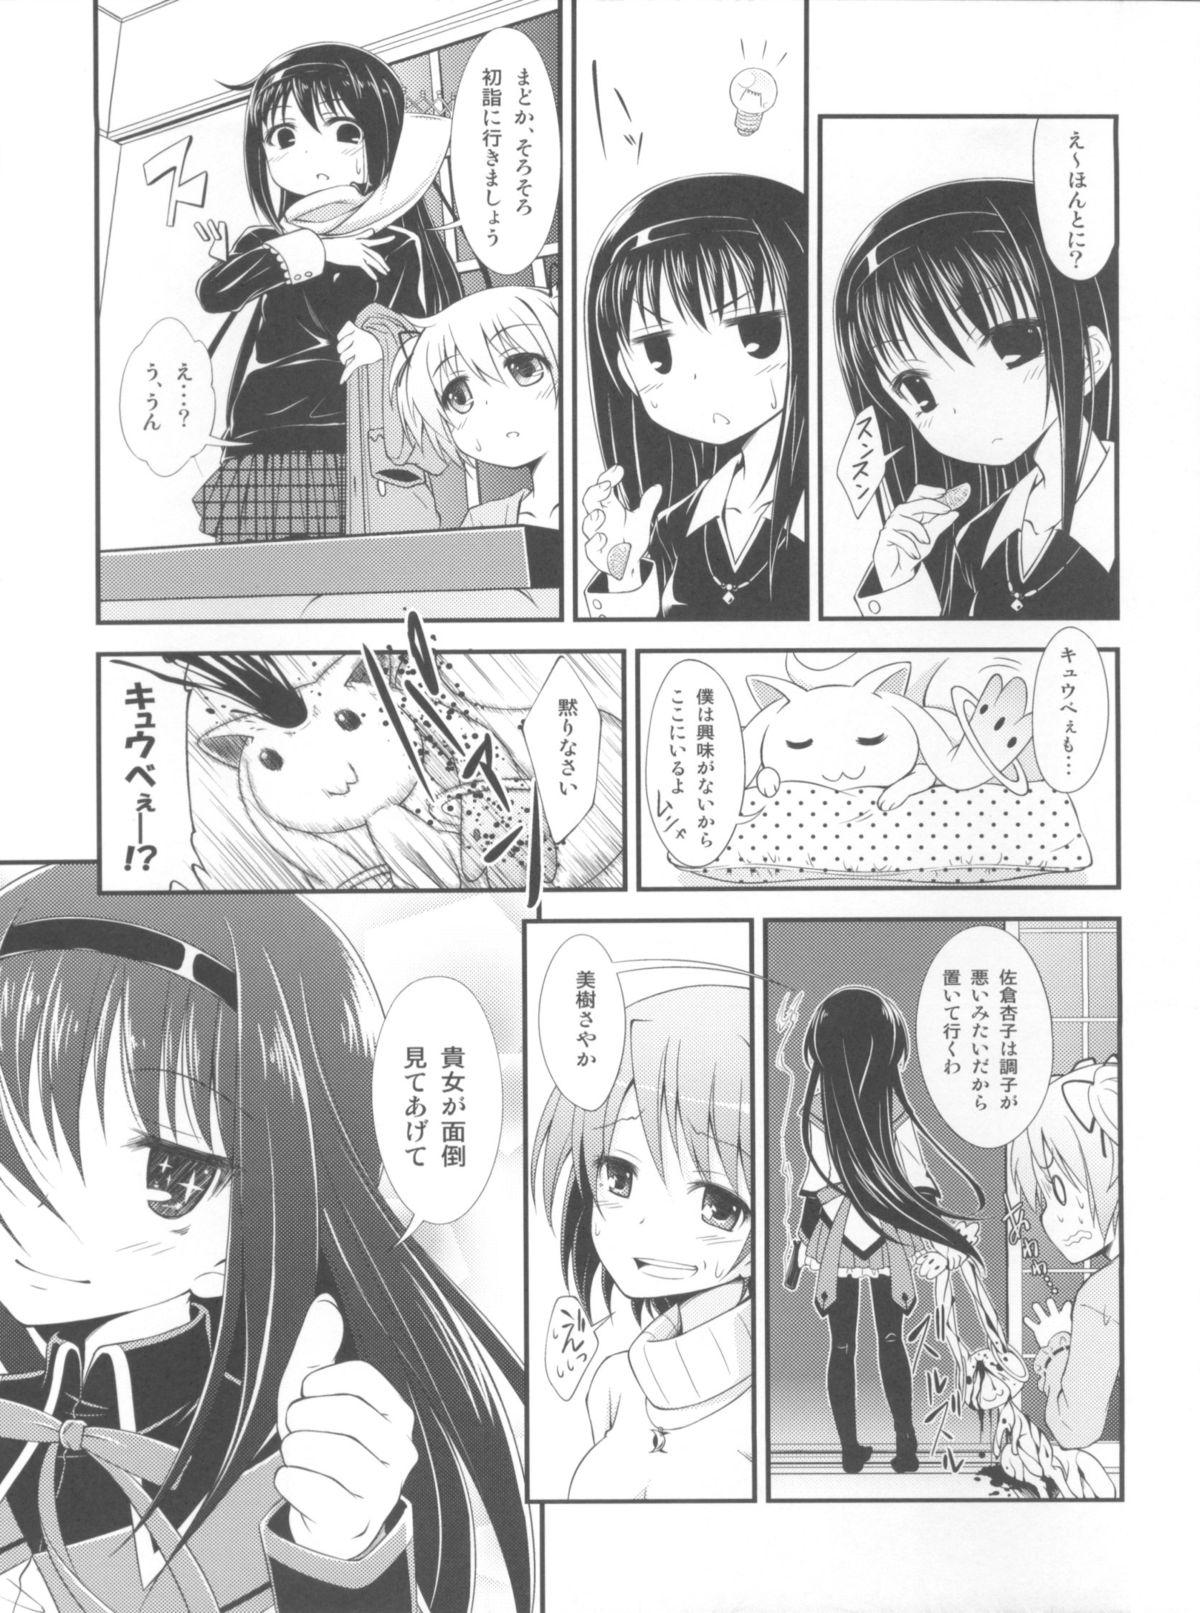 Assfucking Lovely Girls' Lily vol.3 - Puella magi madoka magica Anal Creampie - Page 6